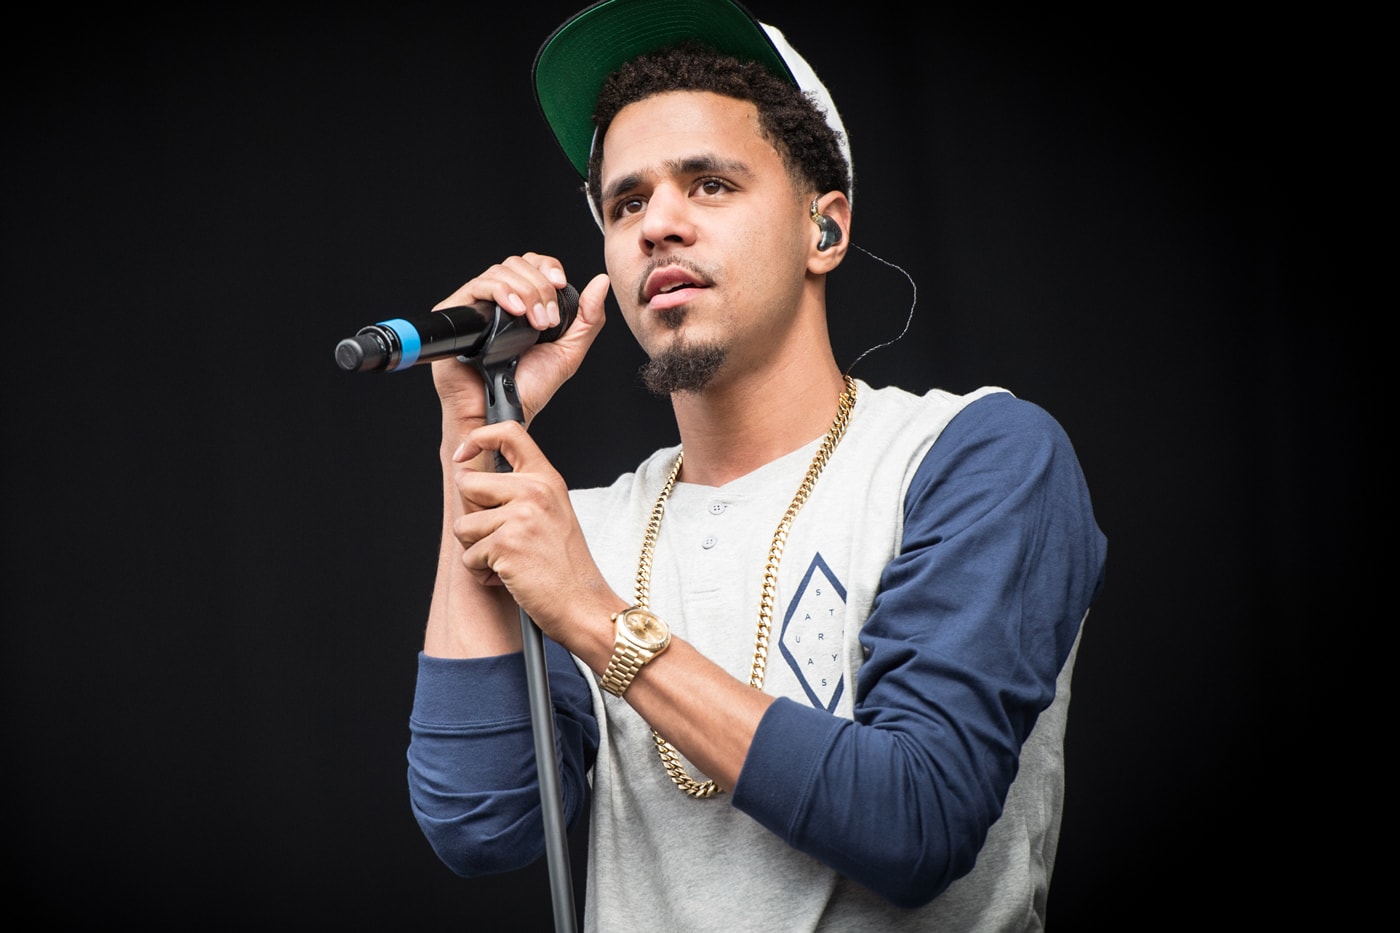 J. Cole featuring Kevin Cossom - Leave Me Alone